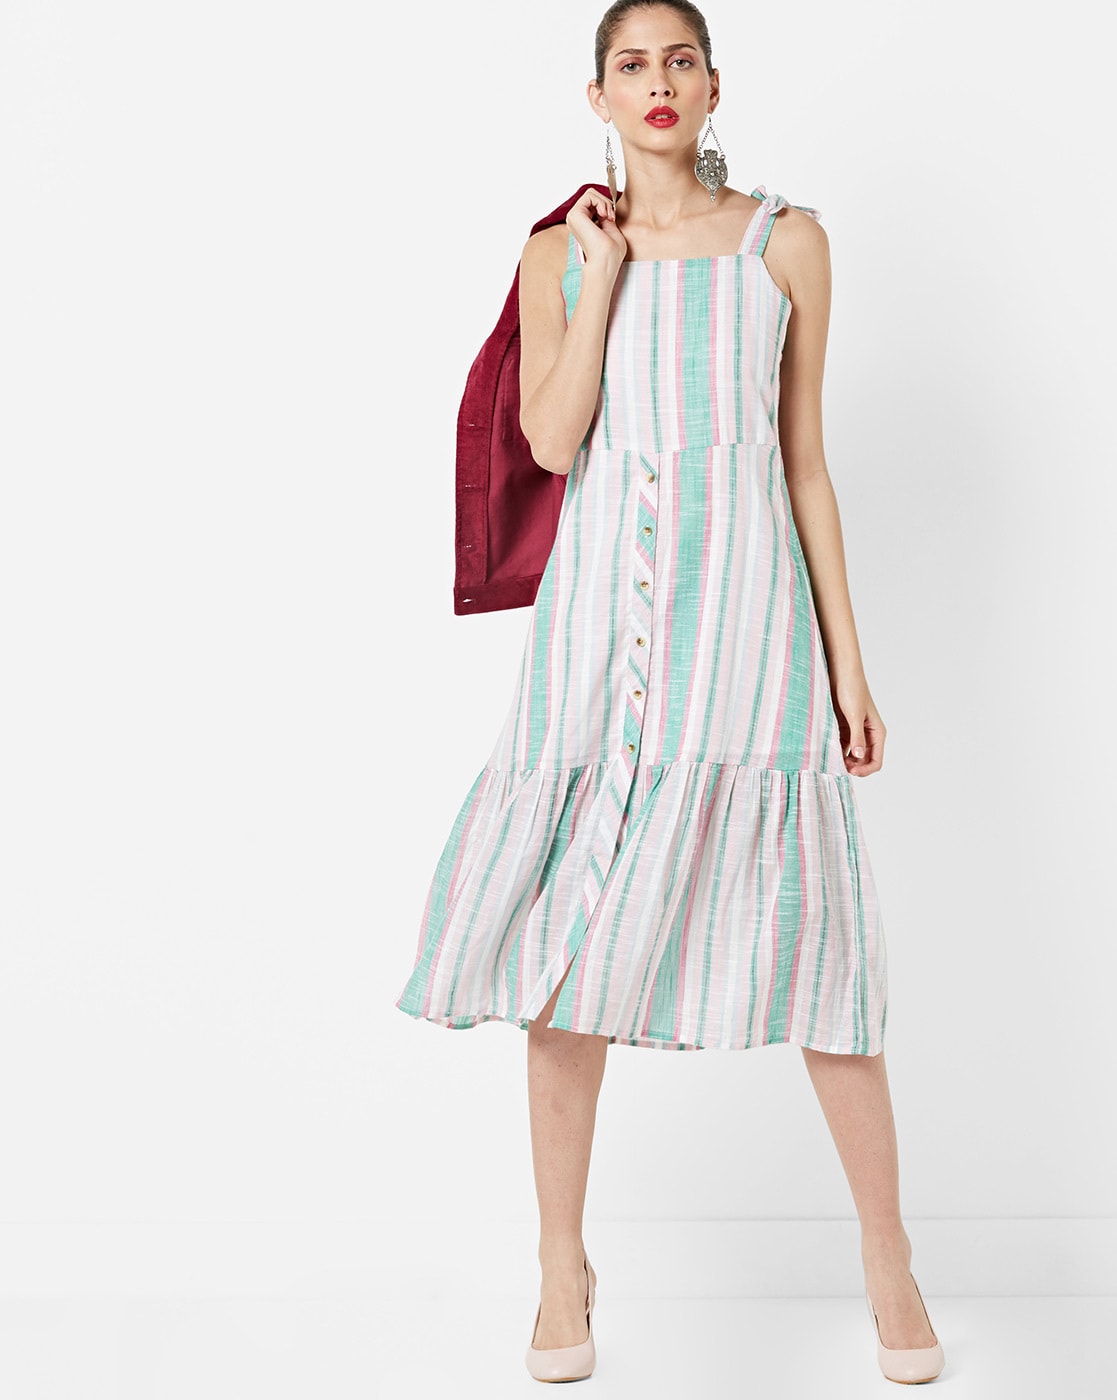 Buy Off-White Dresses & Gowns for Women by AJIO Online | Ajio.com